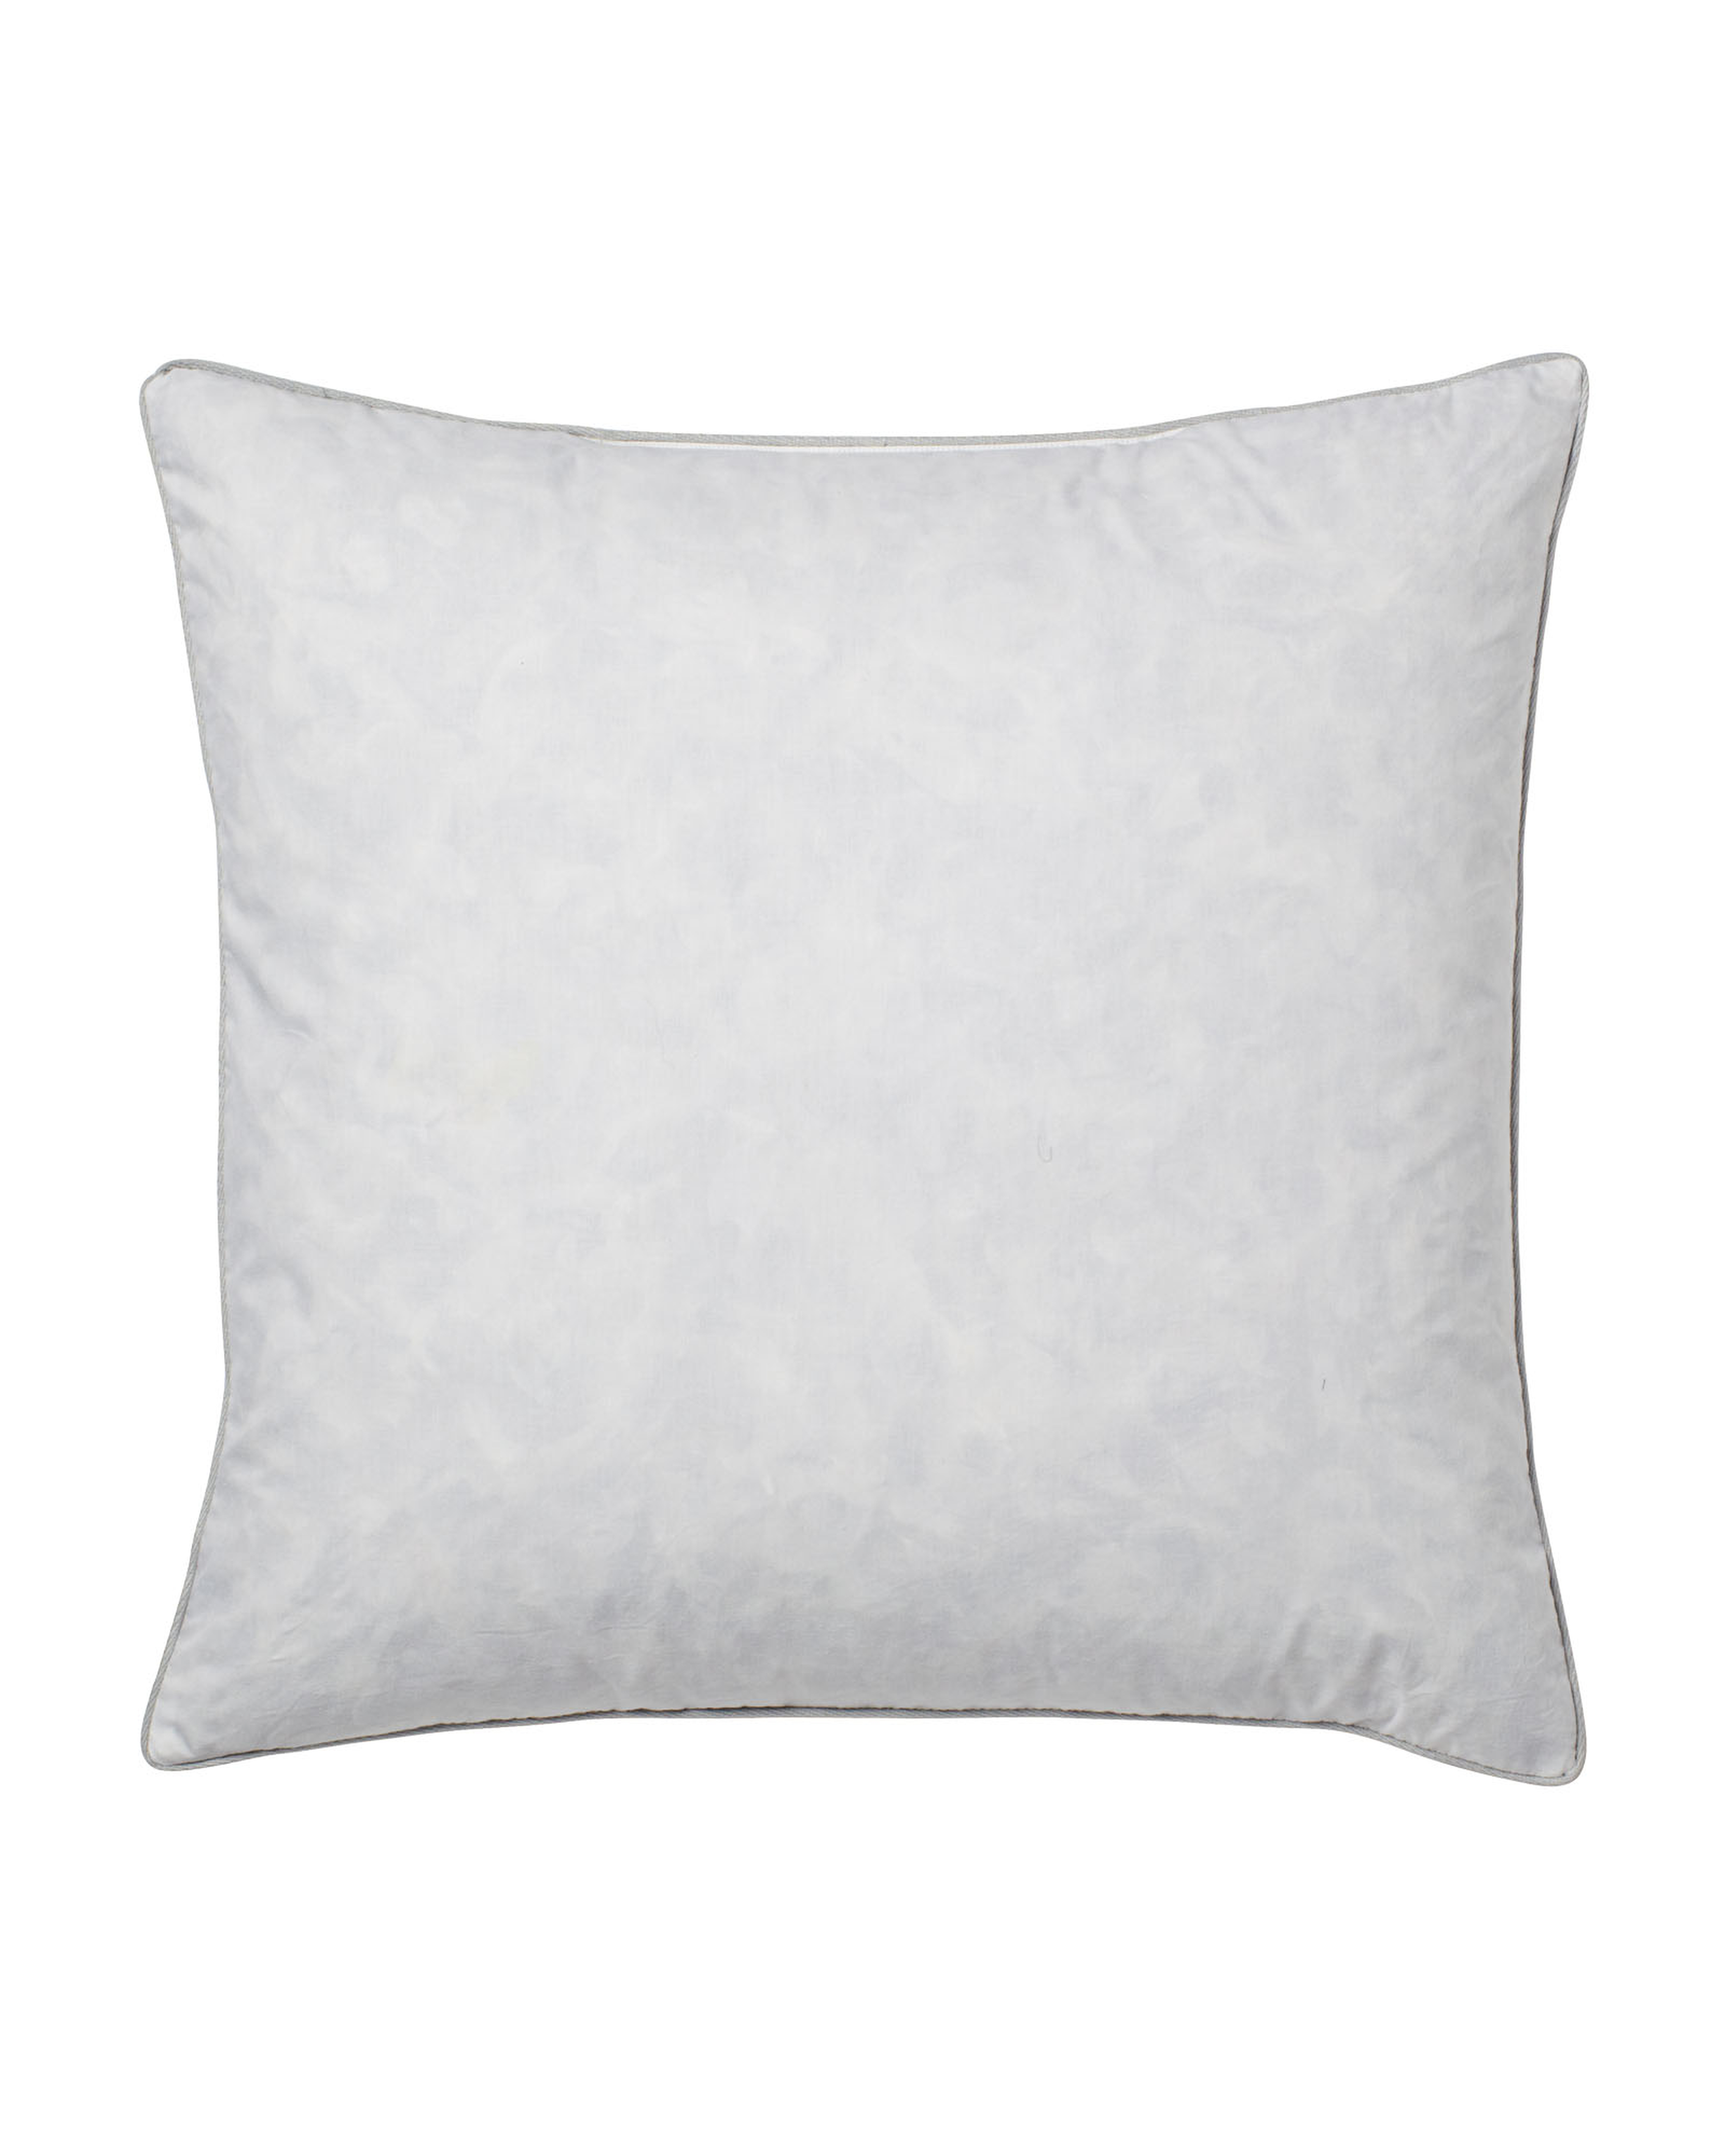 Pillow Insert - 20x20 - Serena and Lily